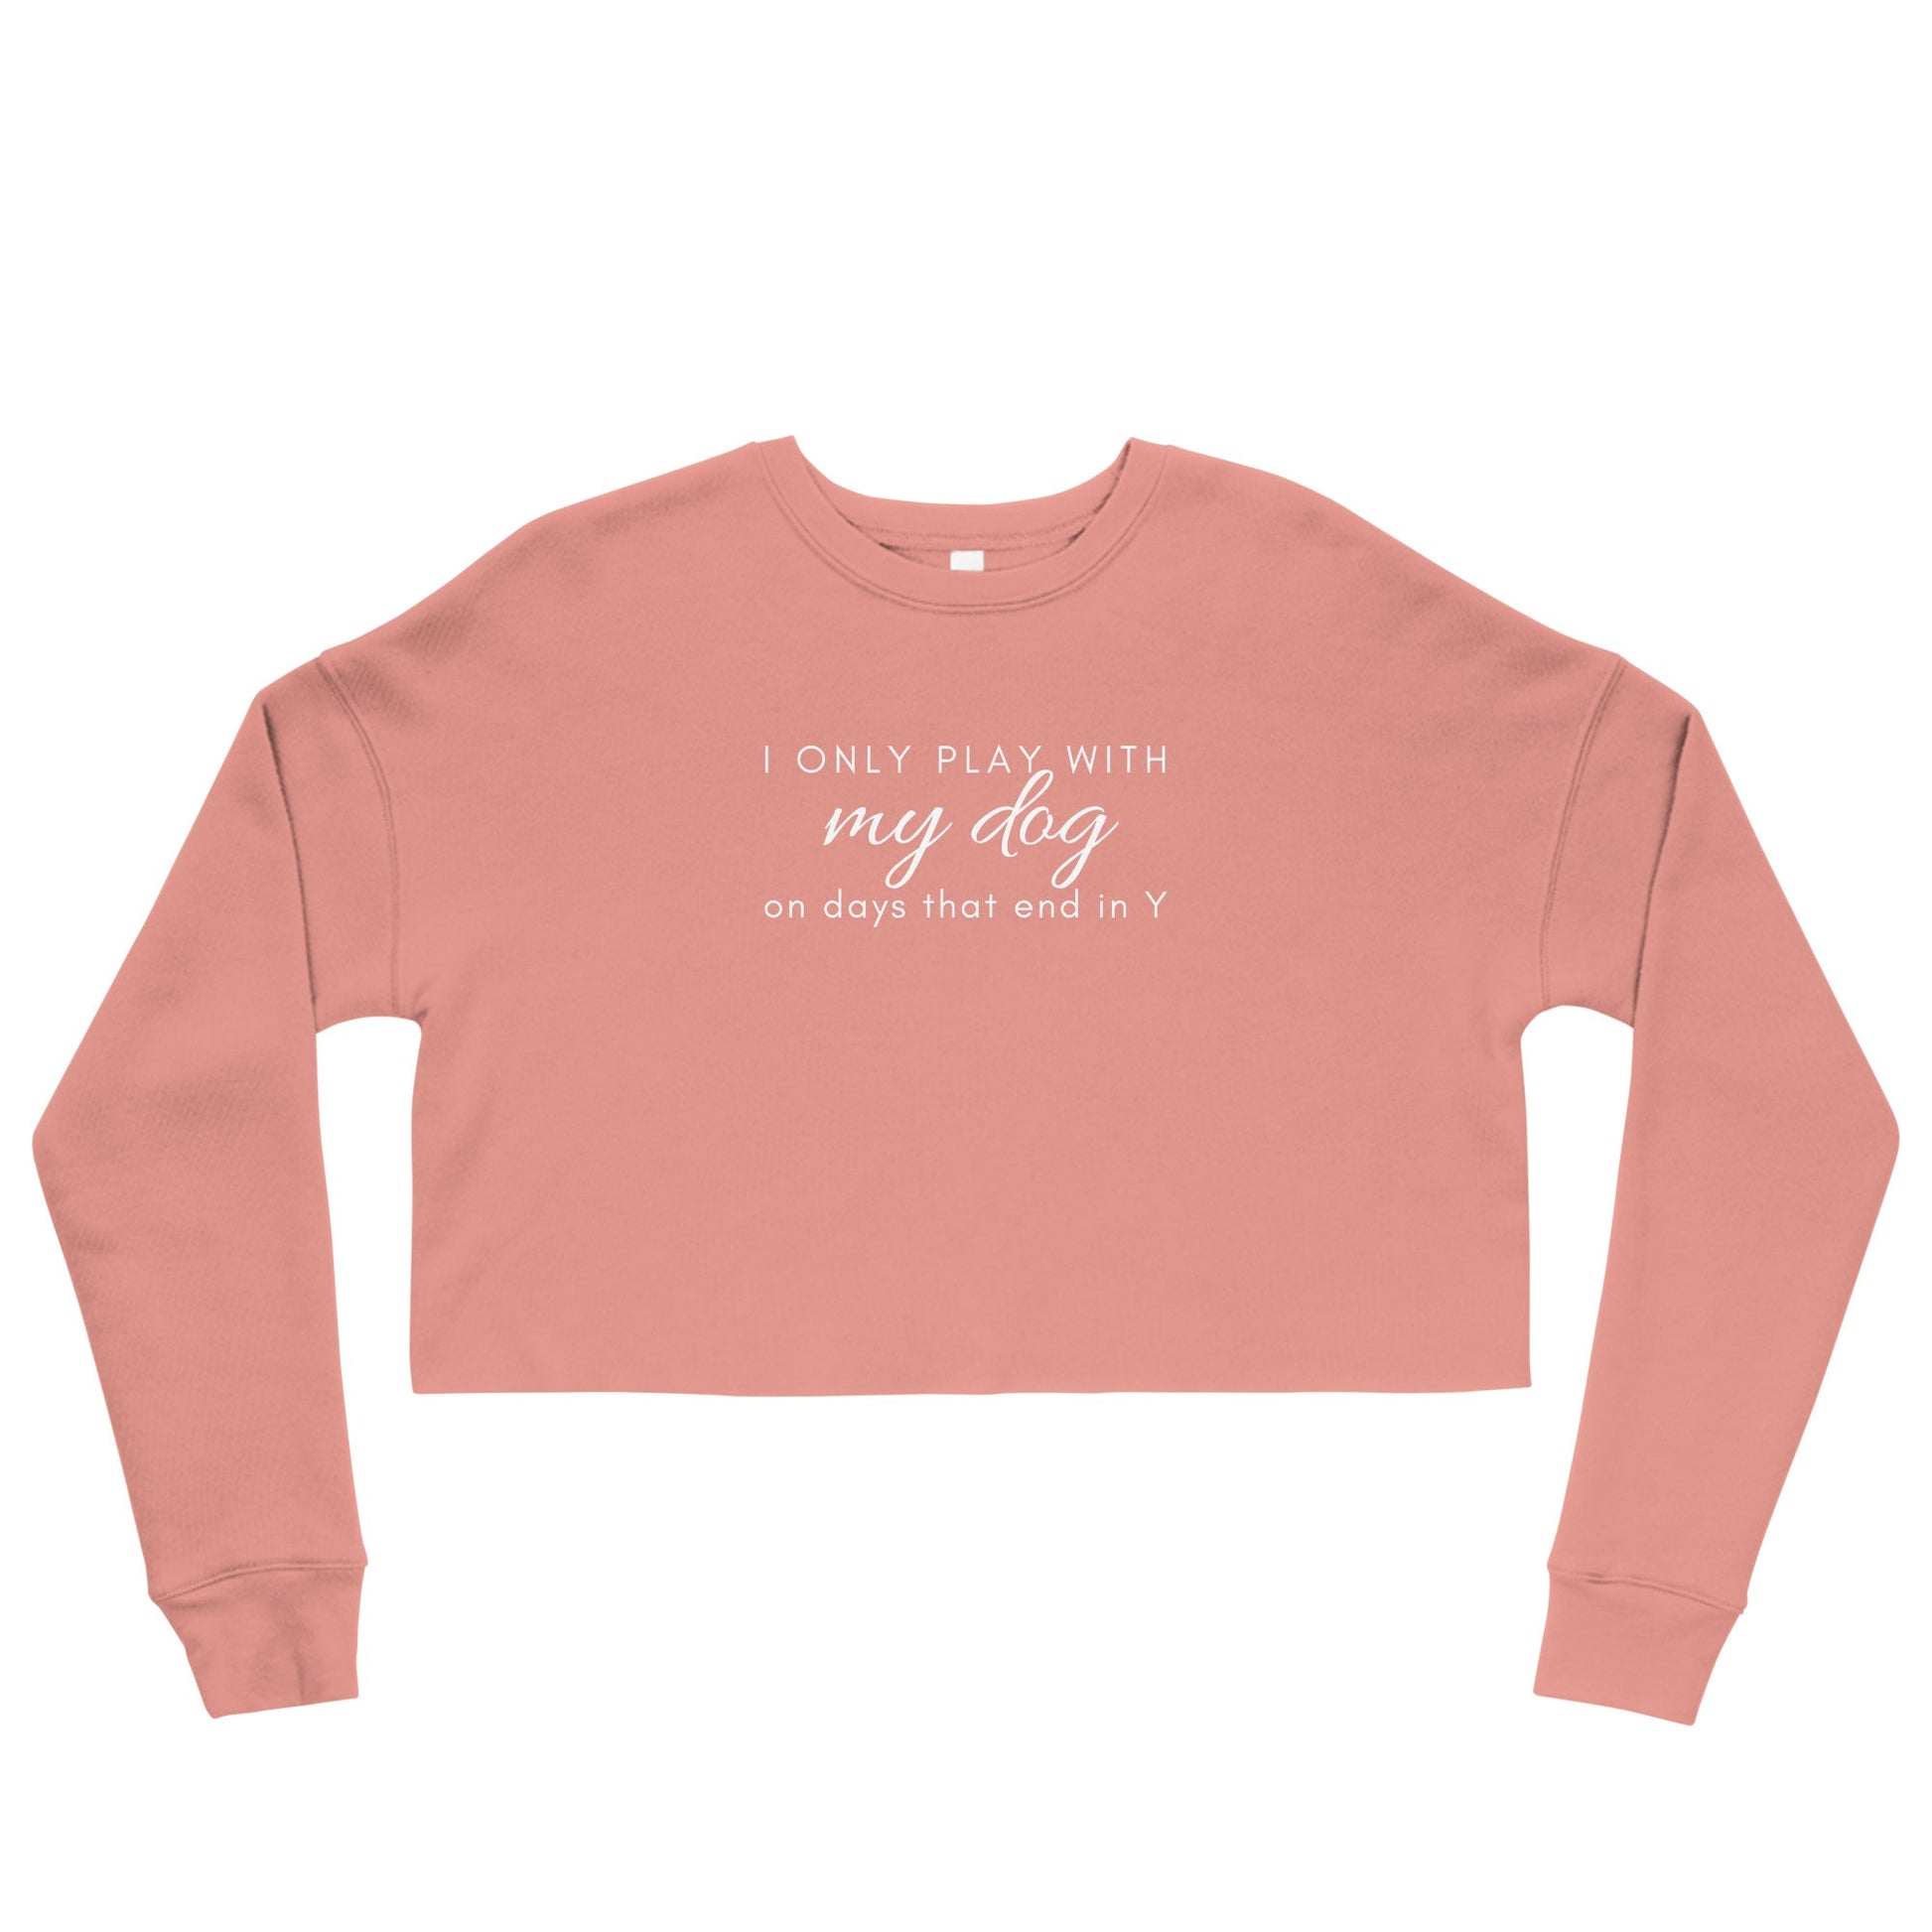 Plays with Dogs Crop Sweatshirt - Mauve / S